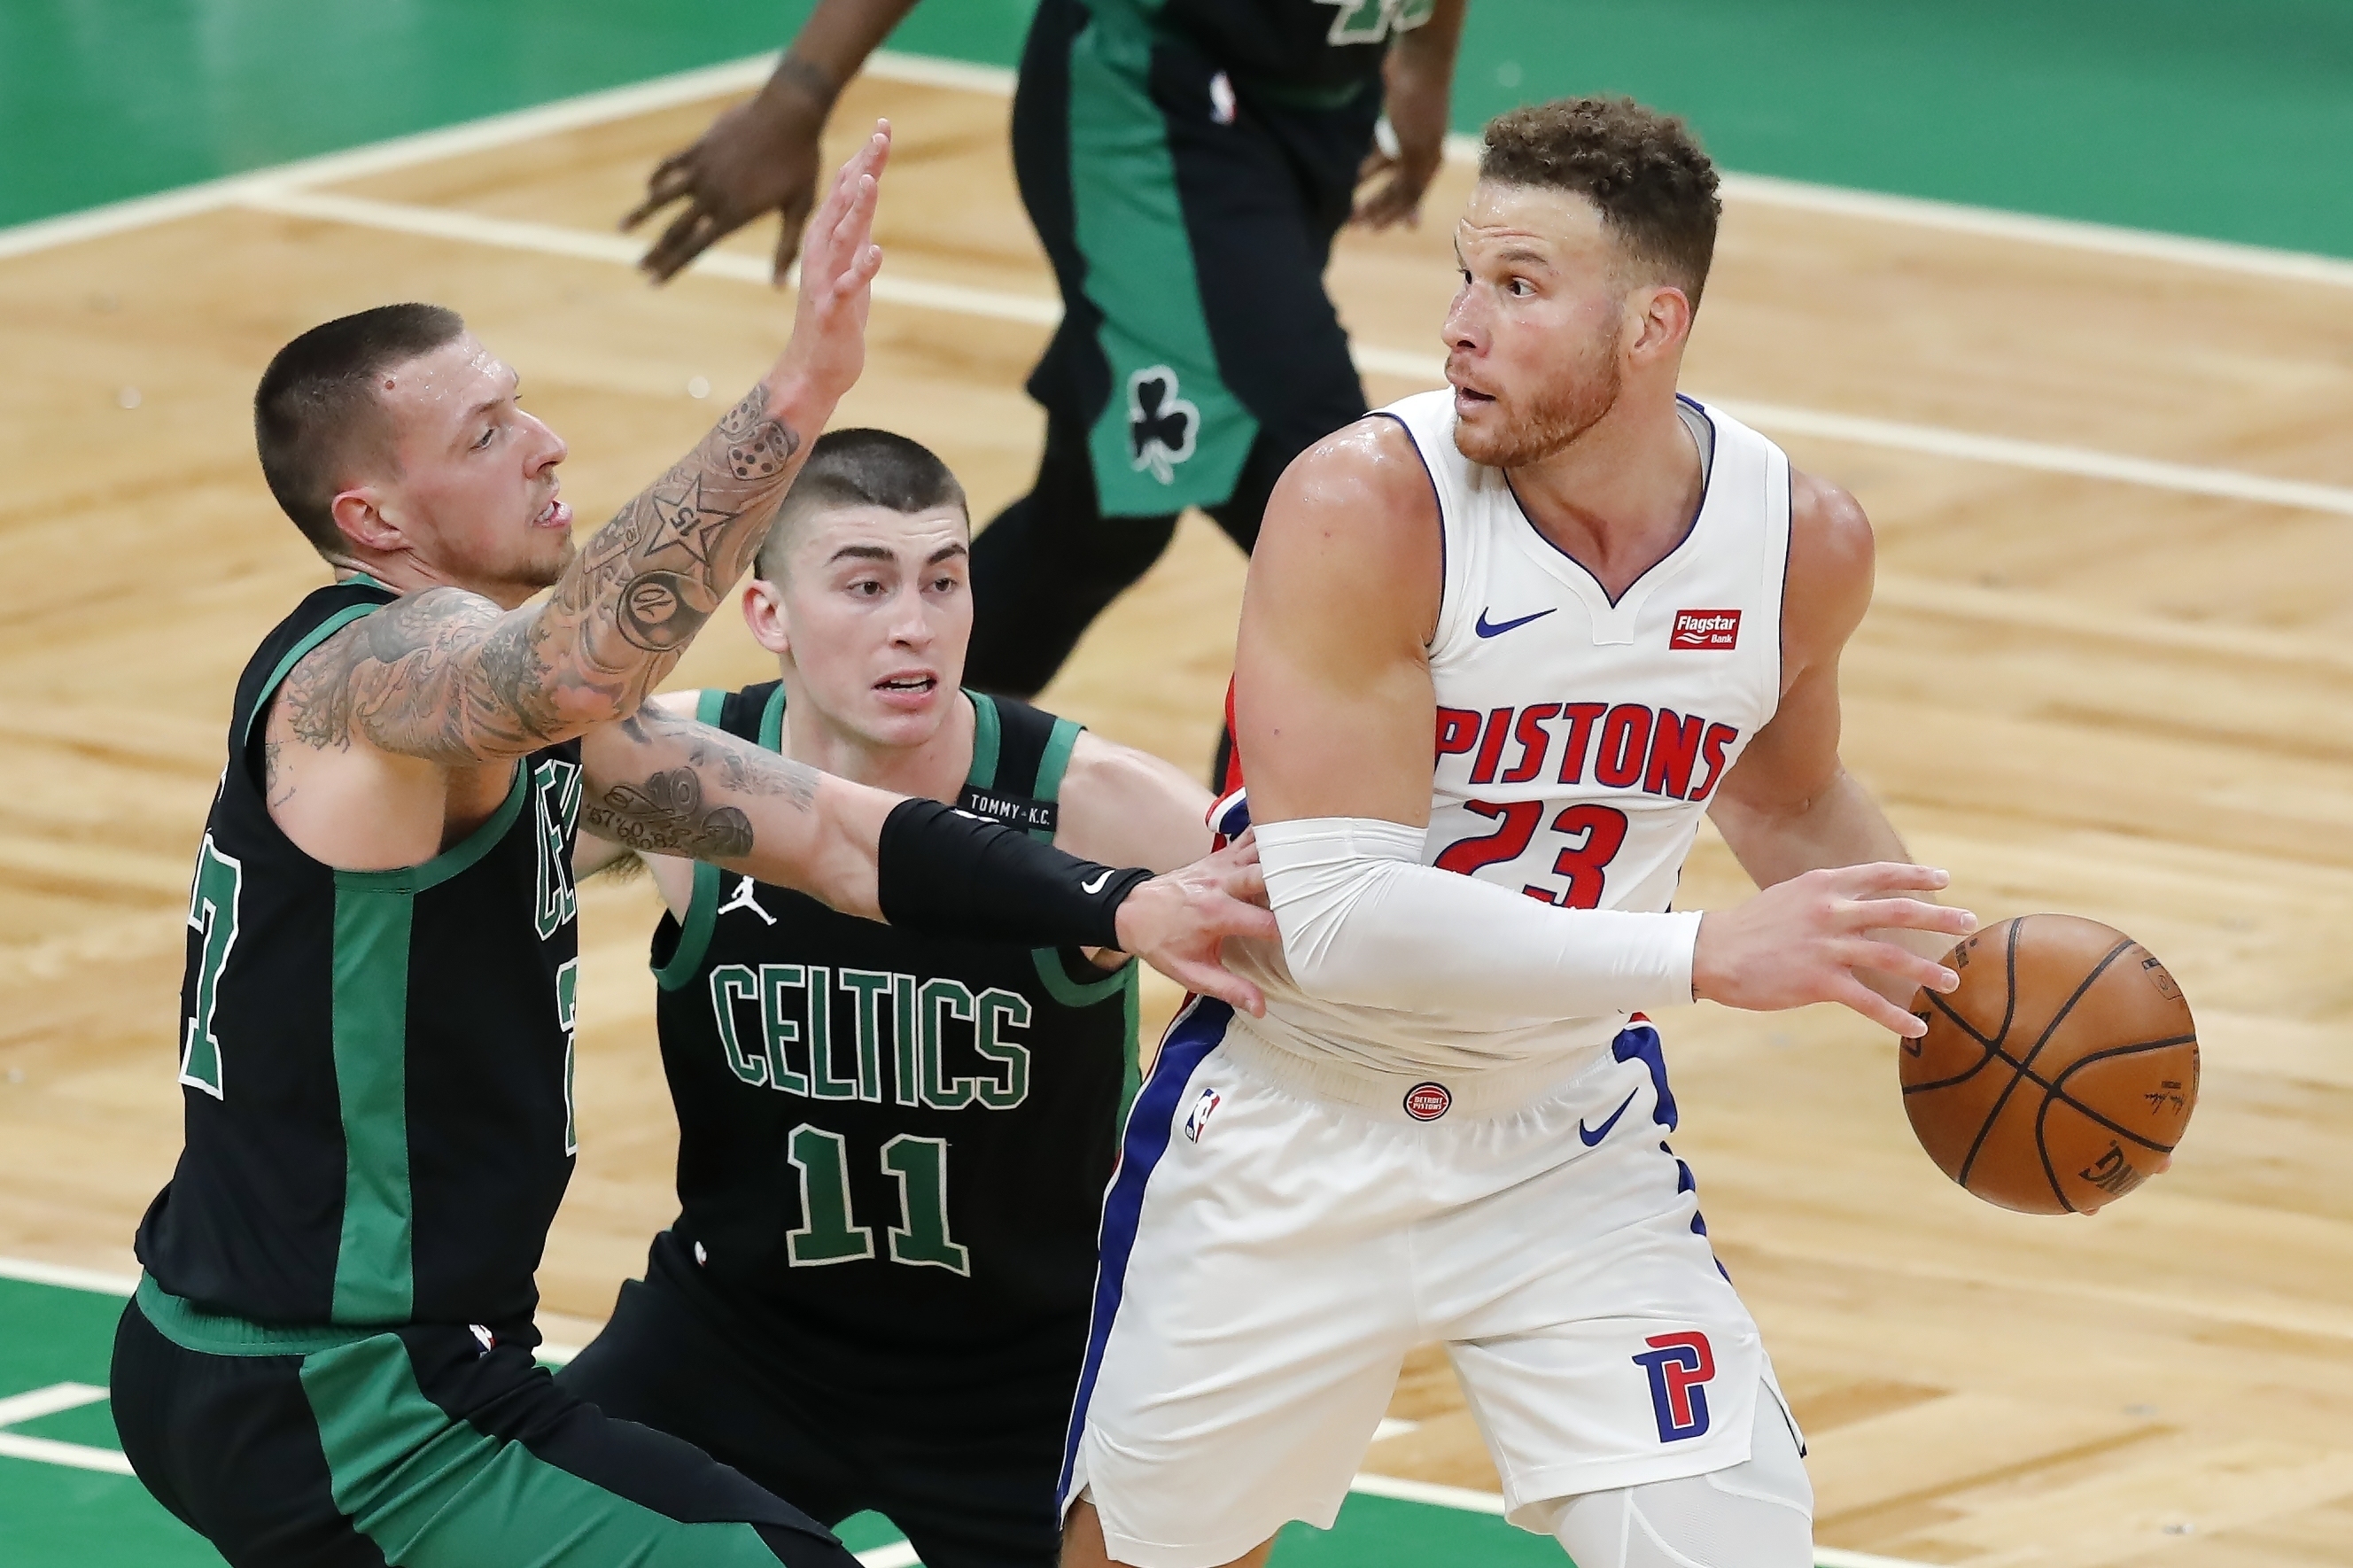 Blake Griffin says Nets players recruited him to Brooklyn: 'I spoke to some  of them